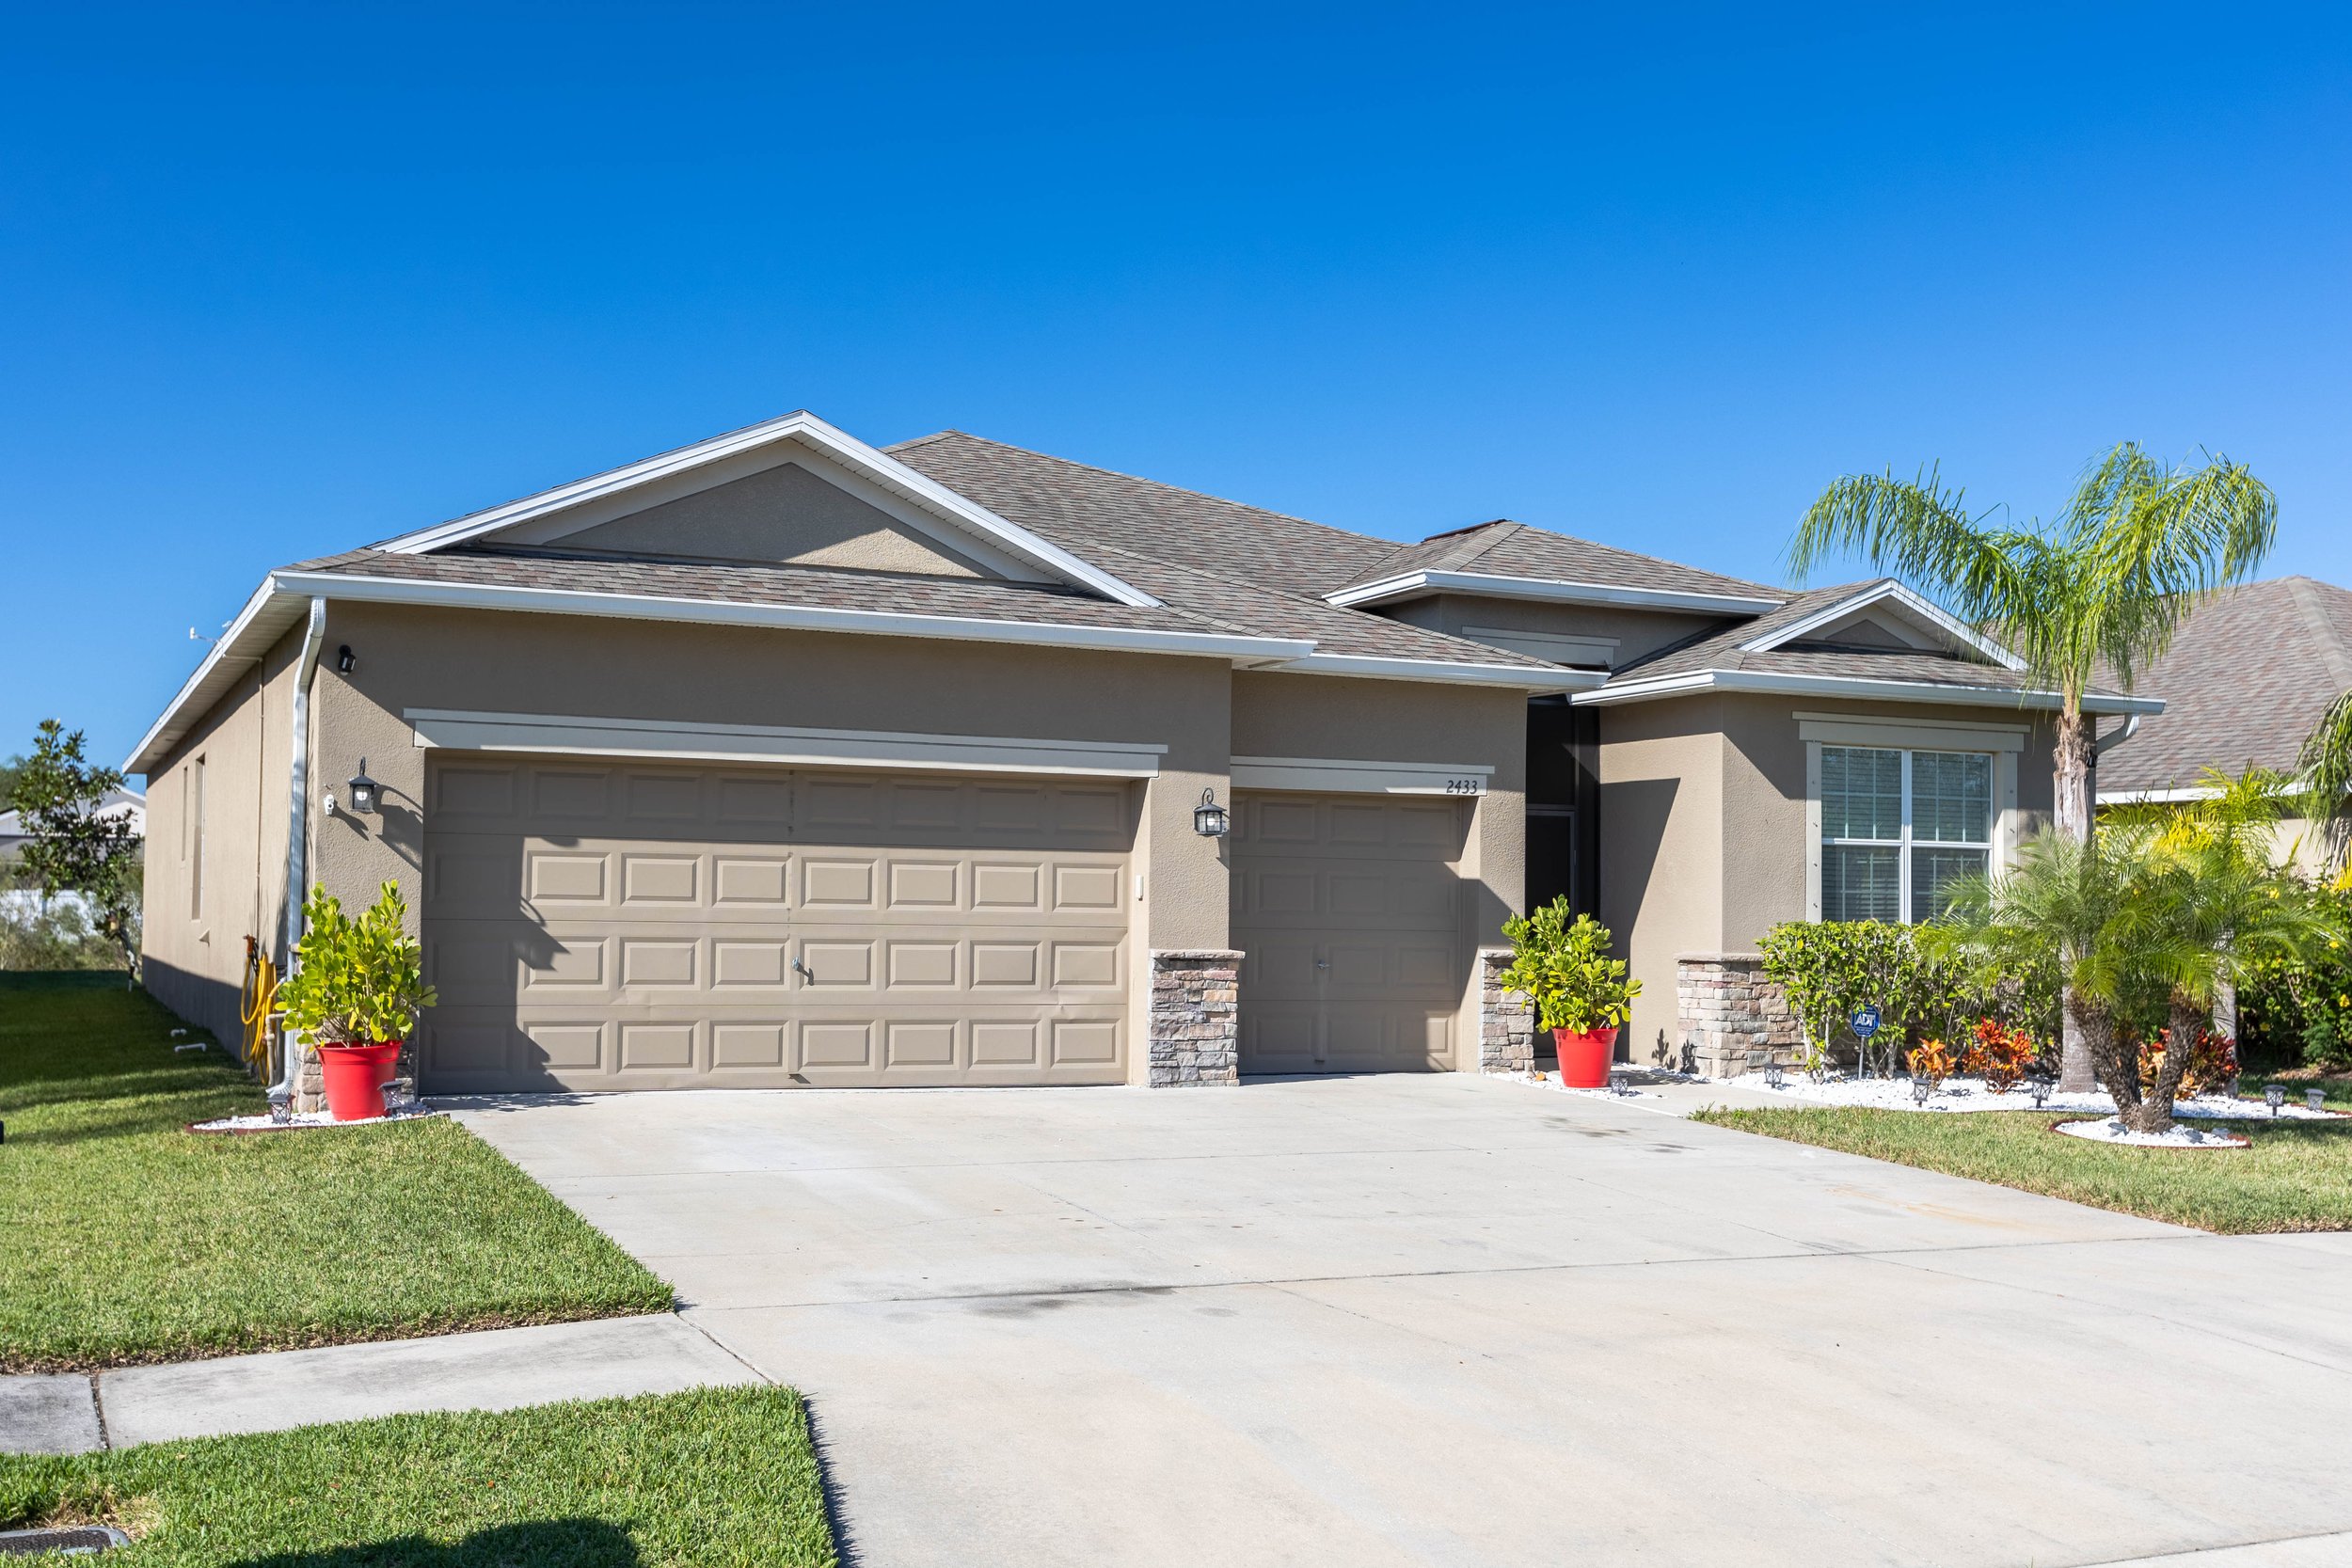 Pinellas County Real Estate Photographer